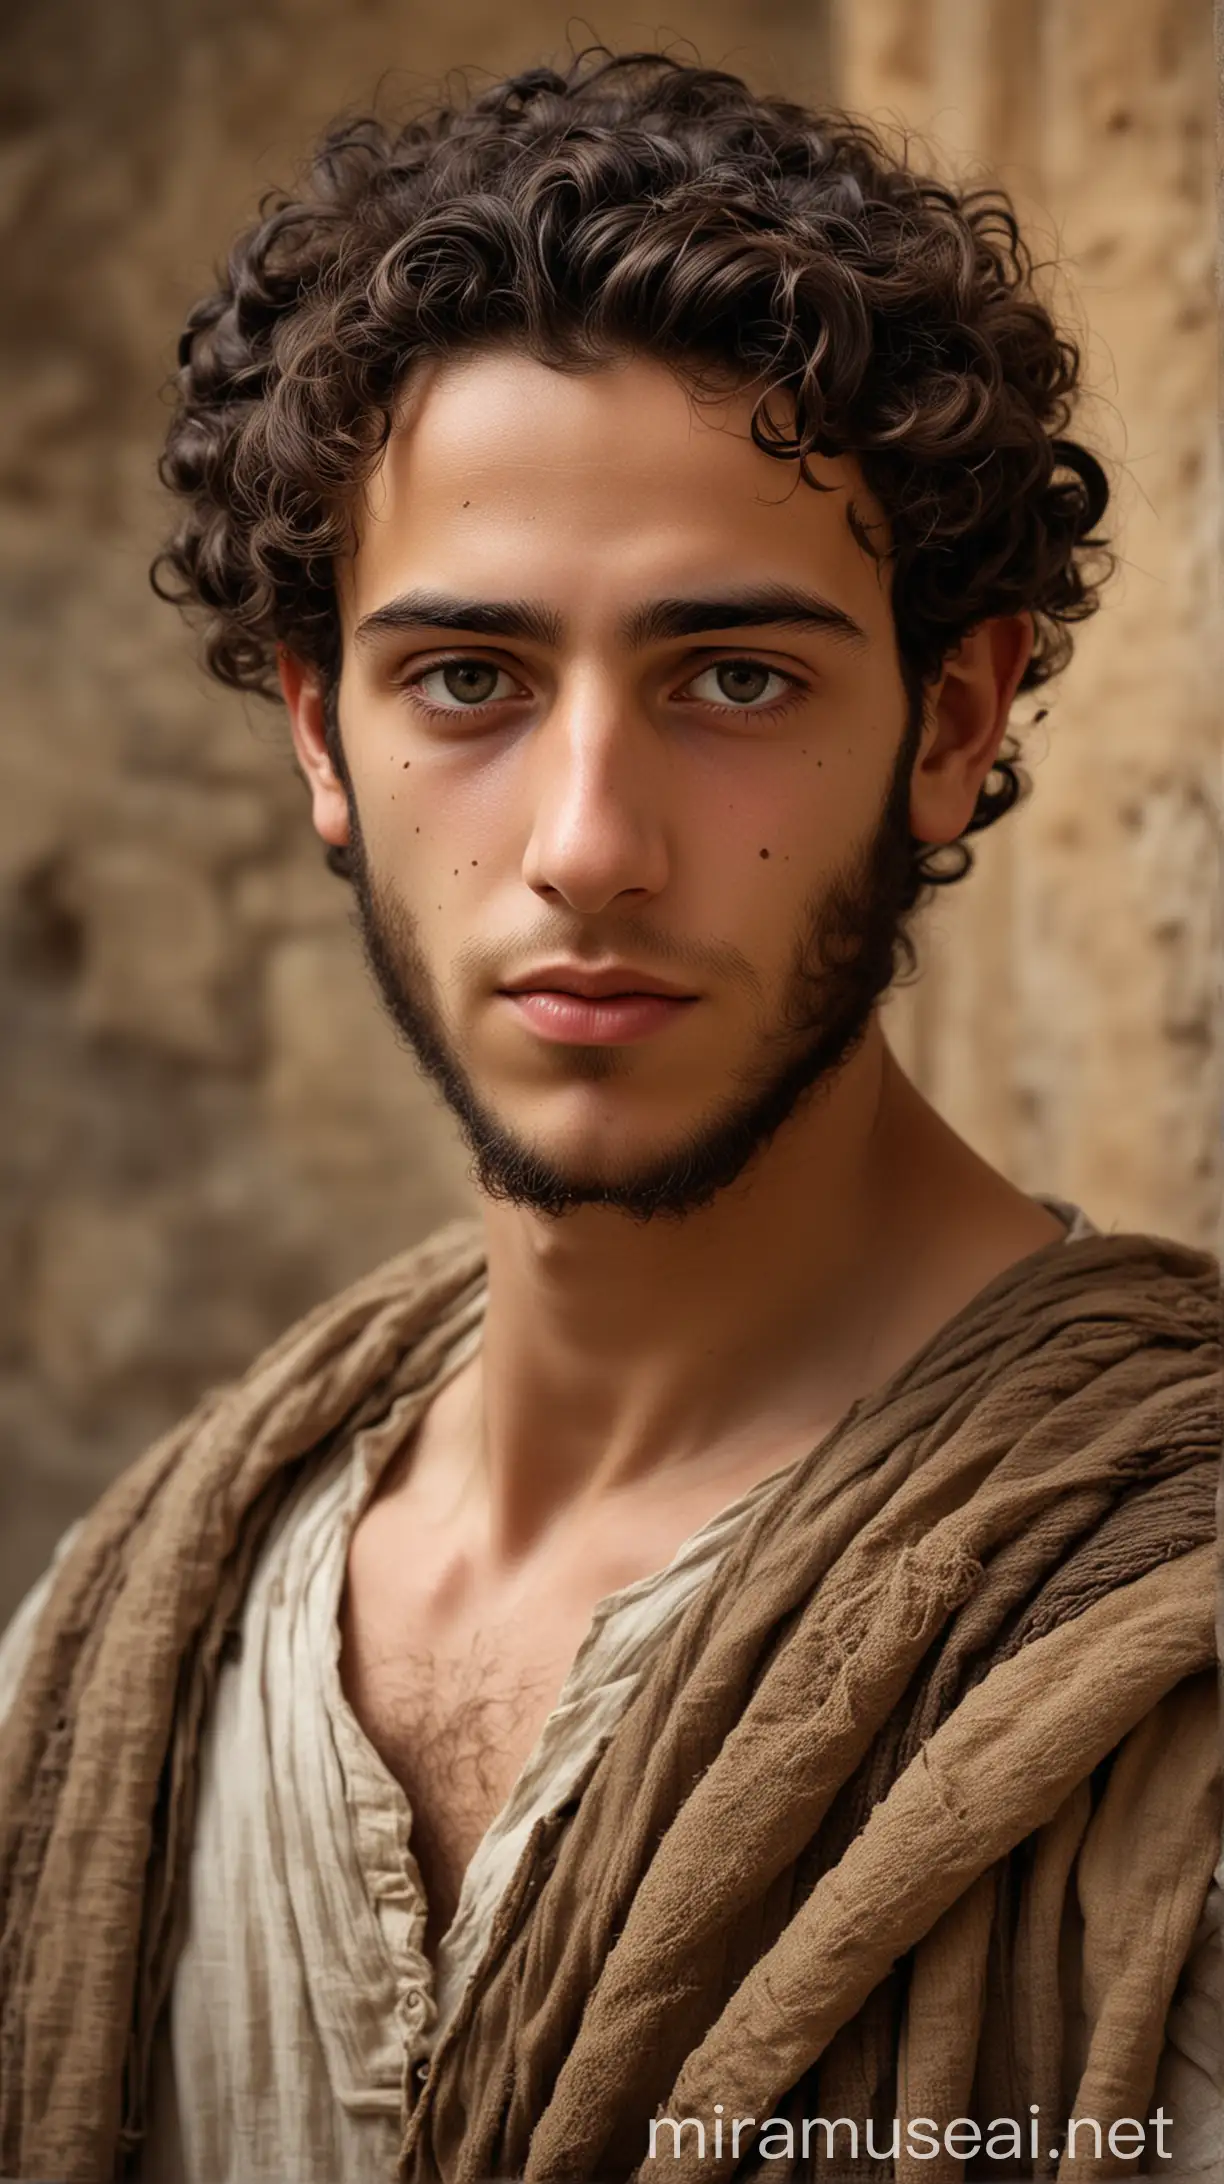 Jewish Young Man in Ancient Setting